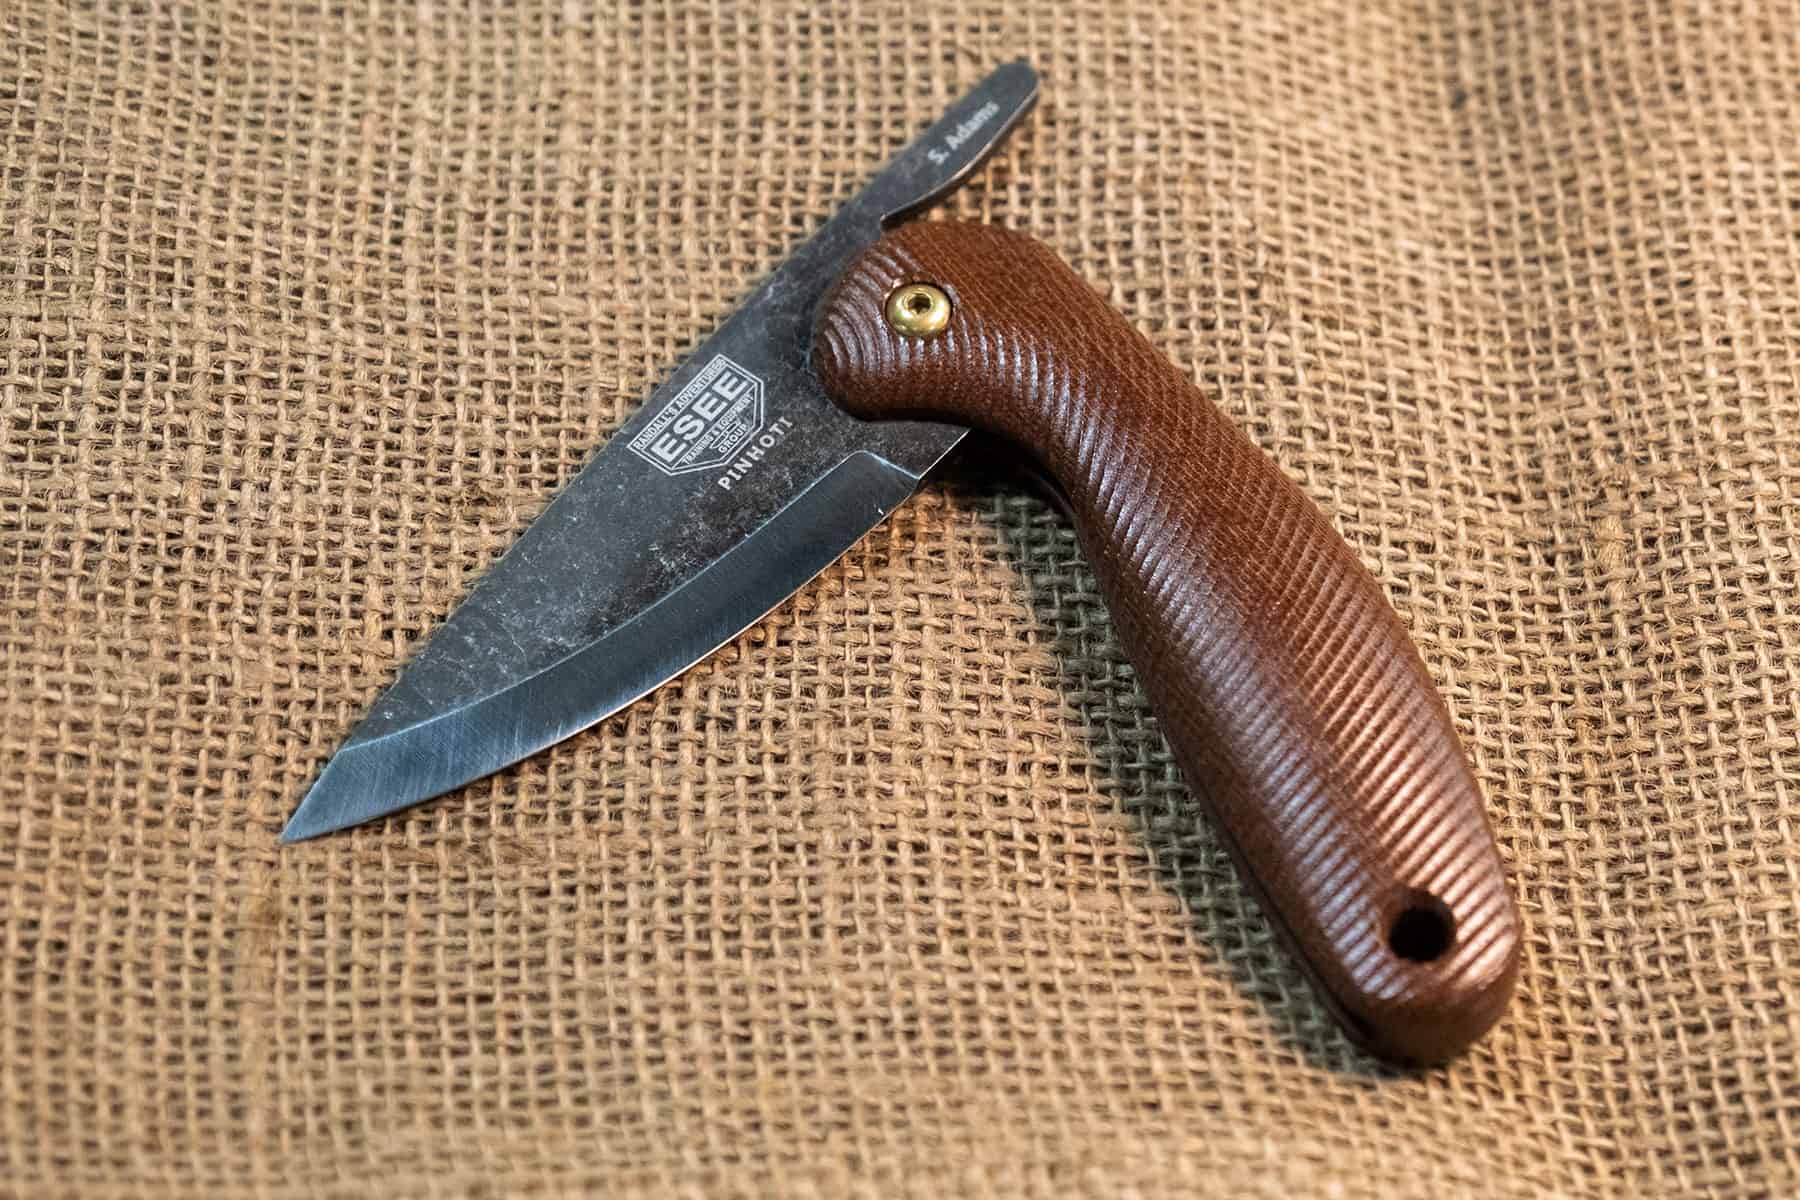 The Esee Pinhoti with G10 handle scales and a 1095 steel blade. 